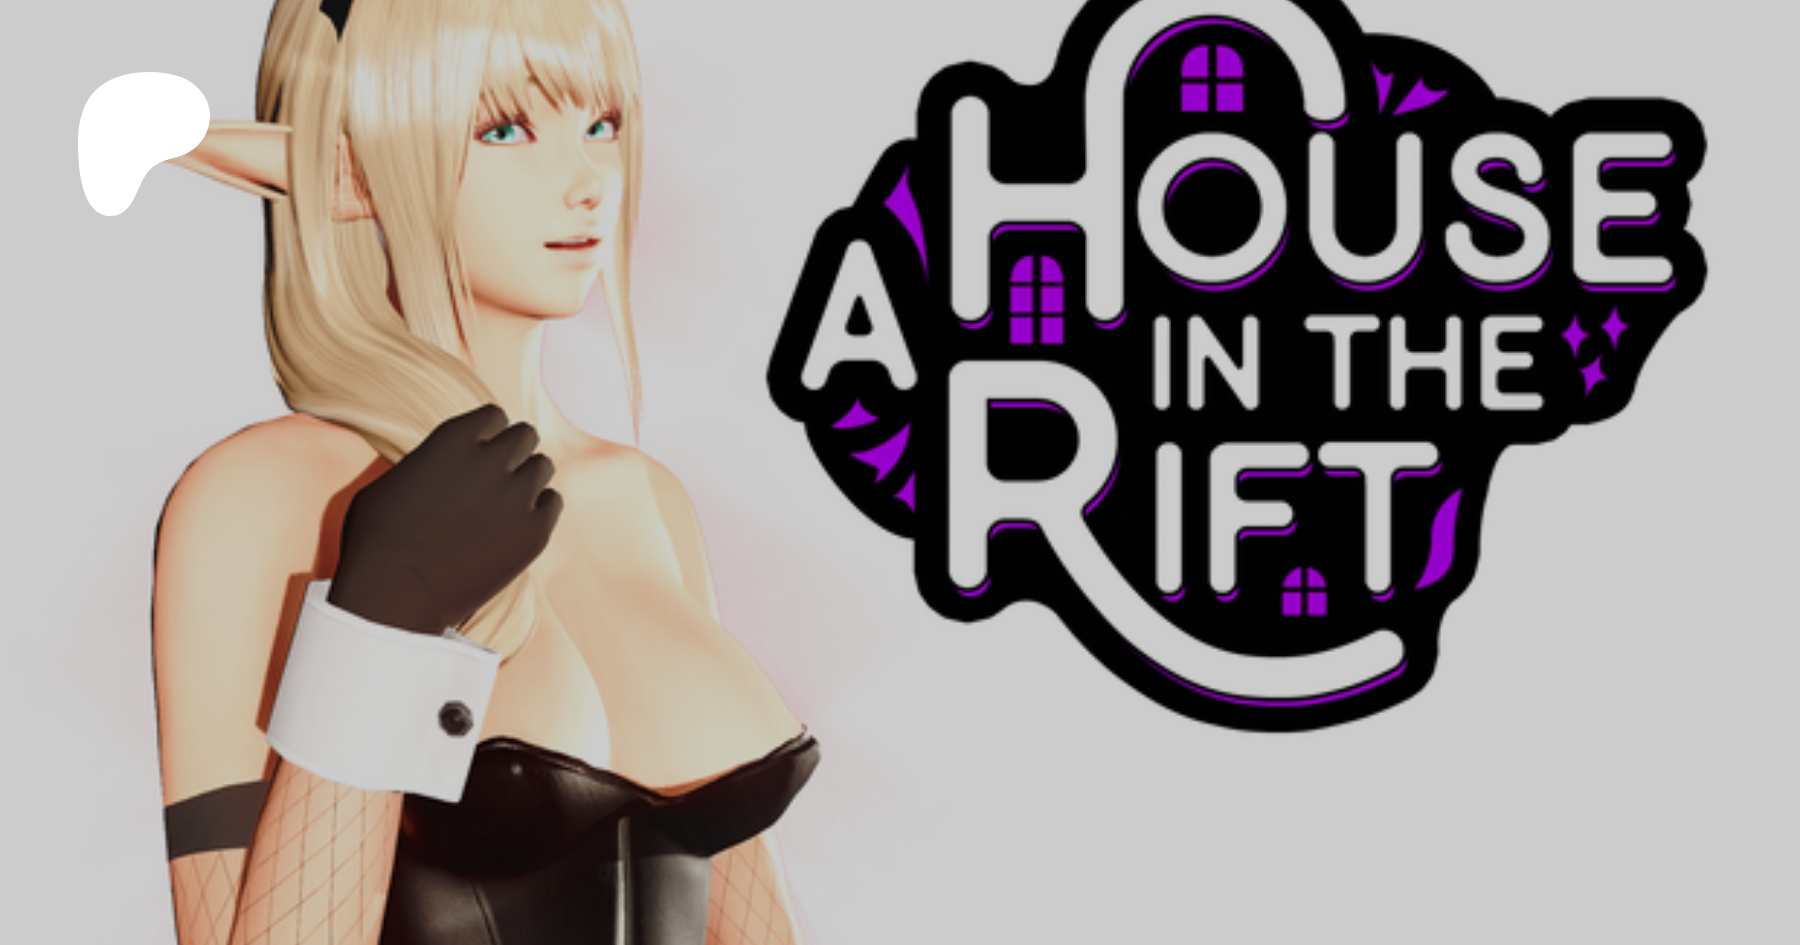 A house in the rift patreon